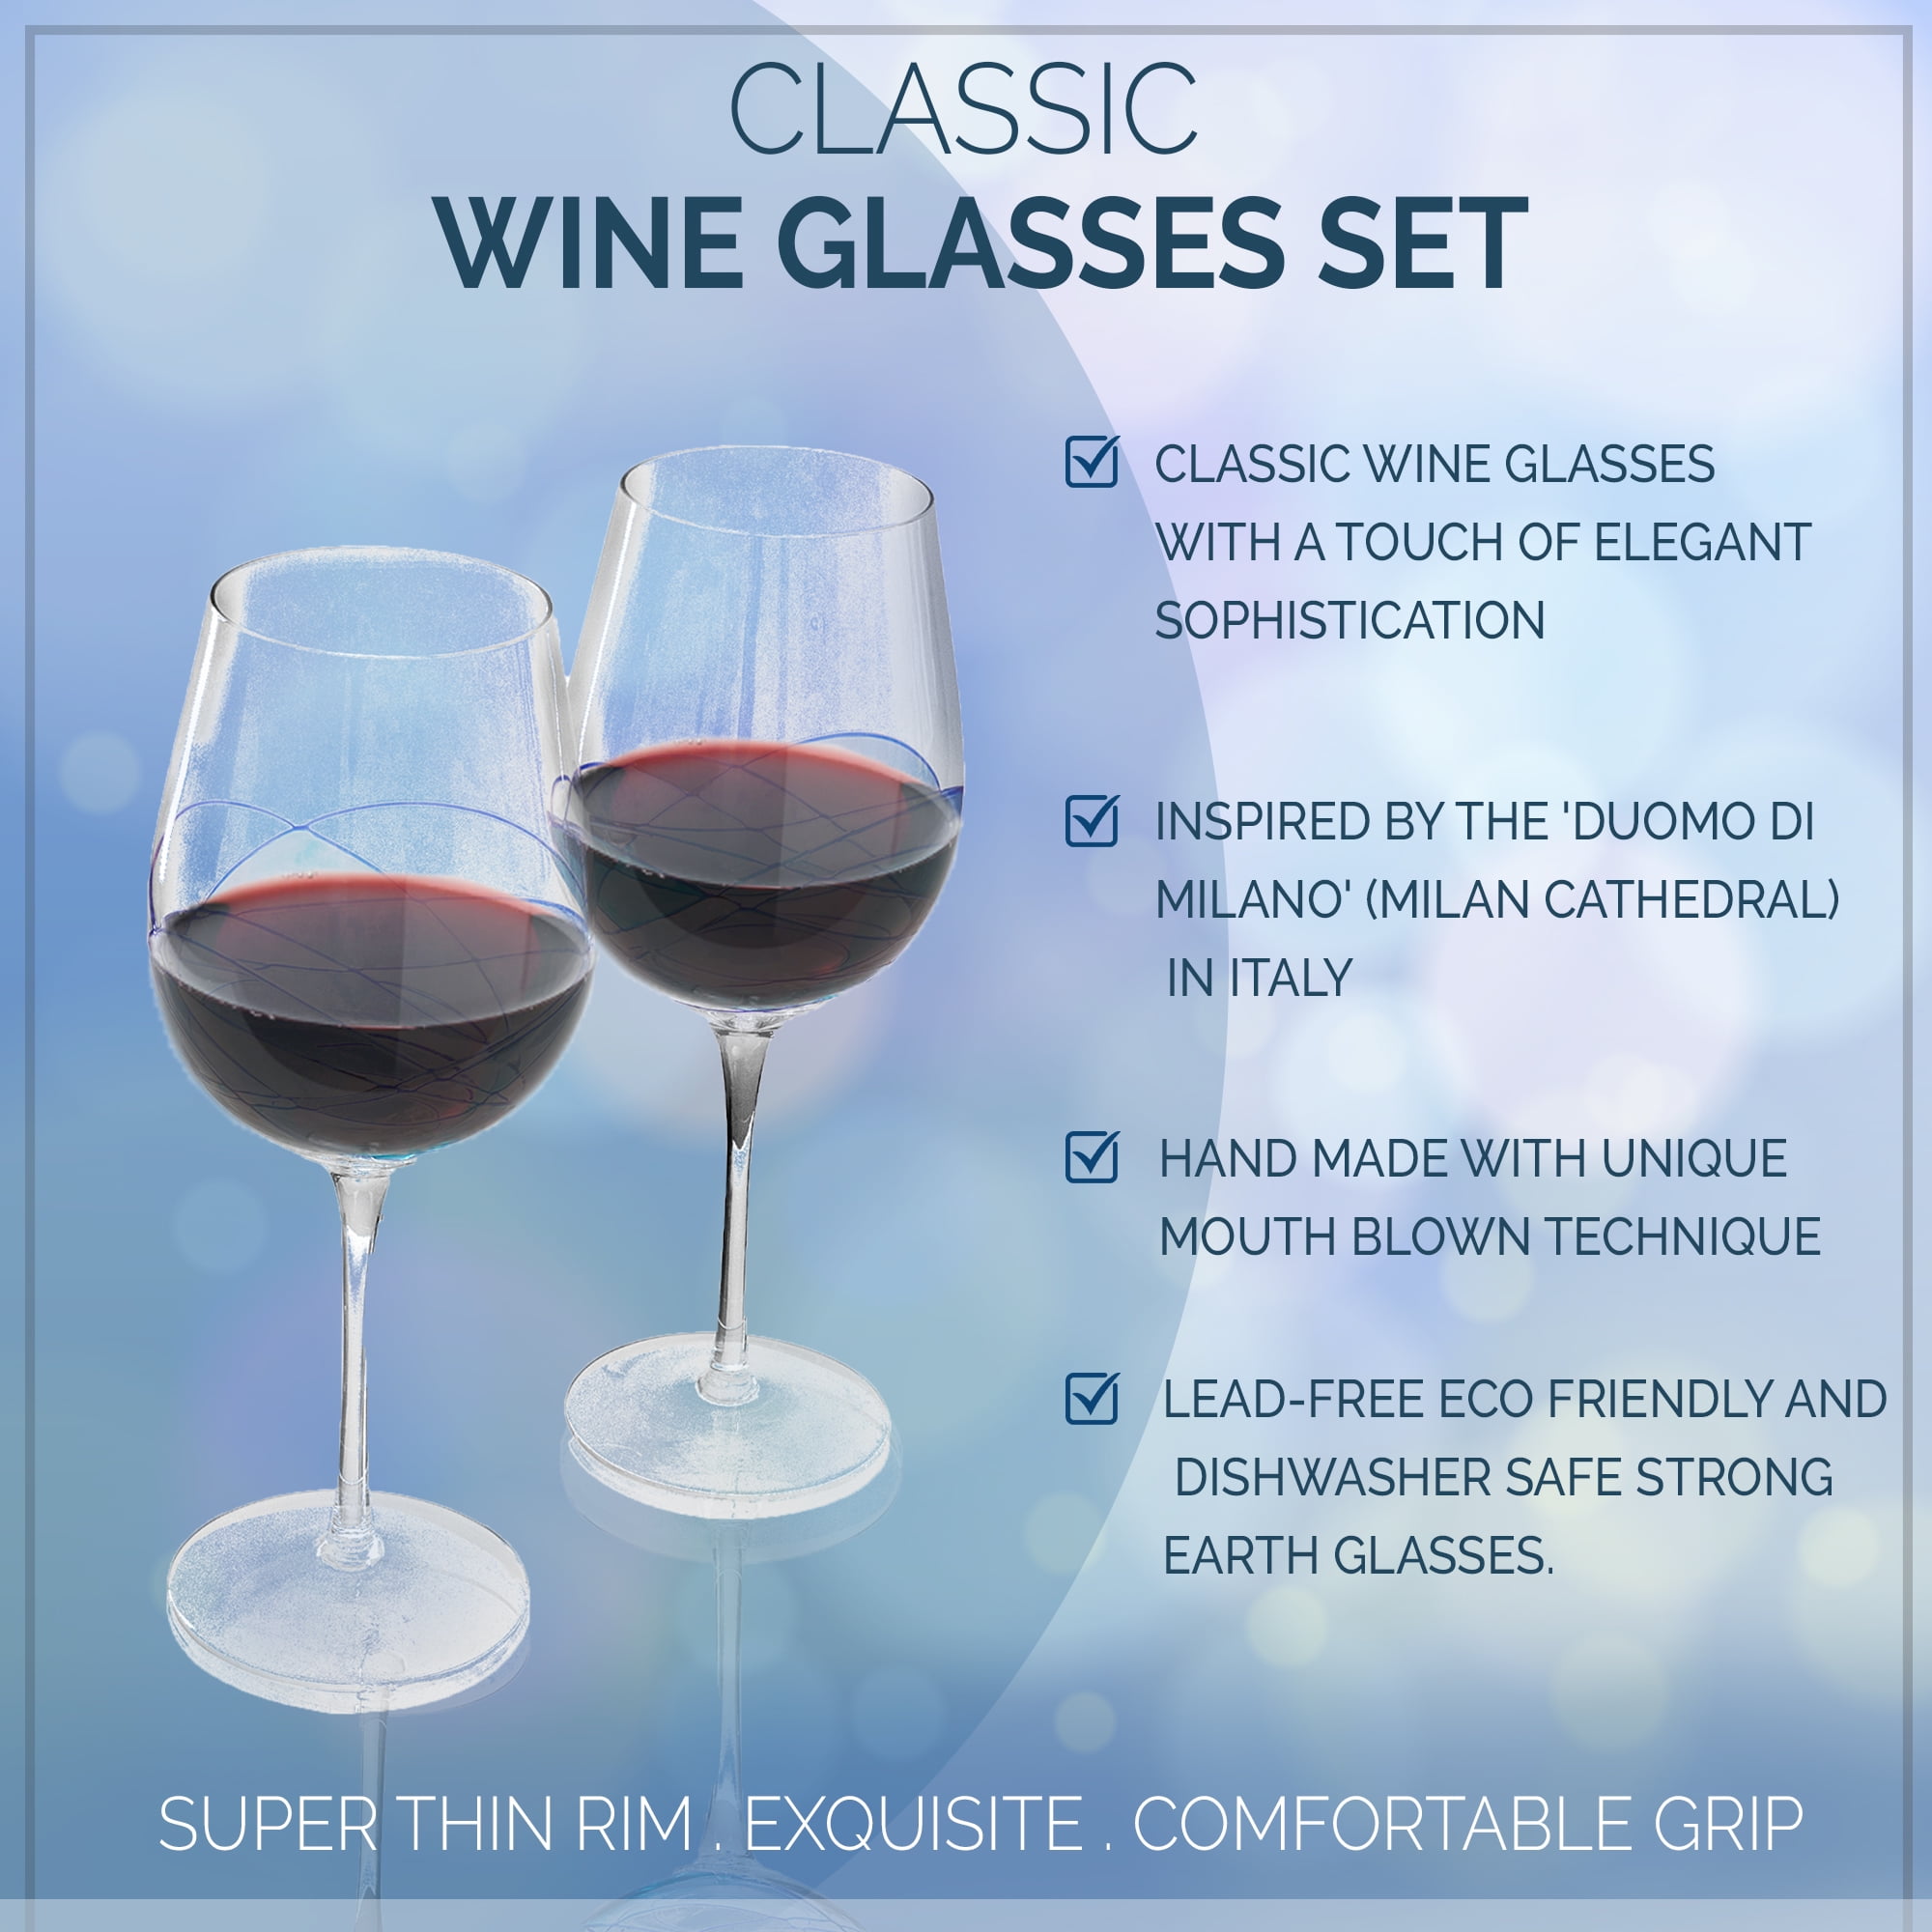 Bezrat Mr and Mrs Stemless Wine Glasses - Set Of 2-16 Ounces - Gift fo